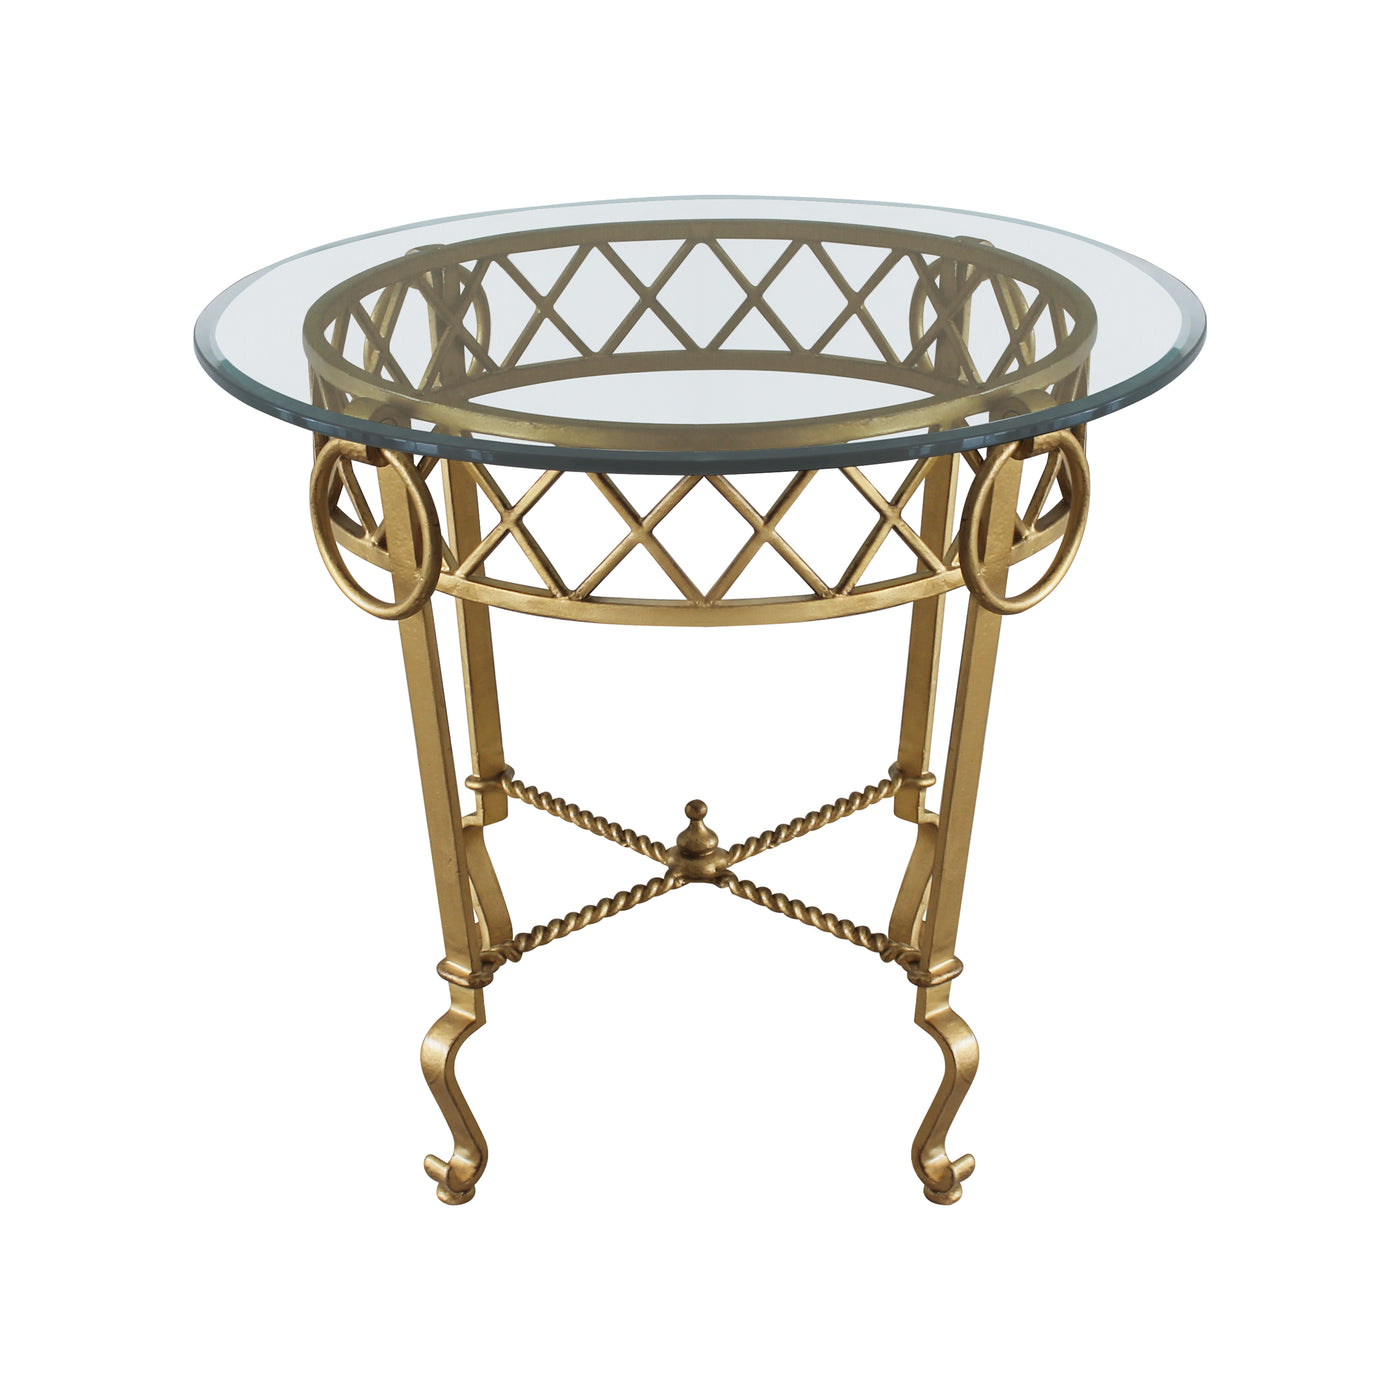 A classical wrought iron table painted in antique gold finish and topped with a clear round glass